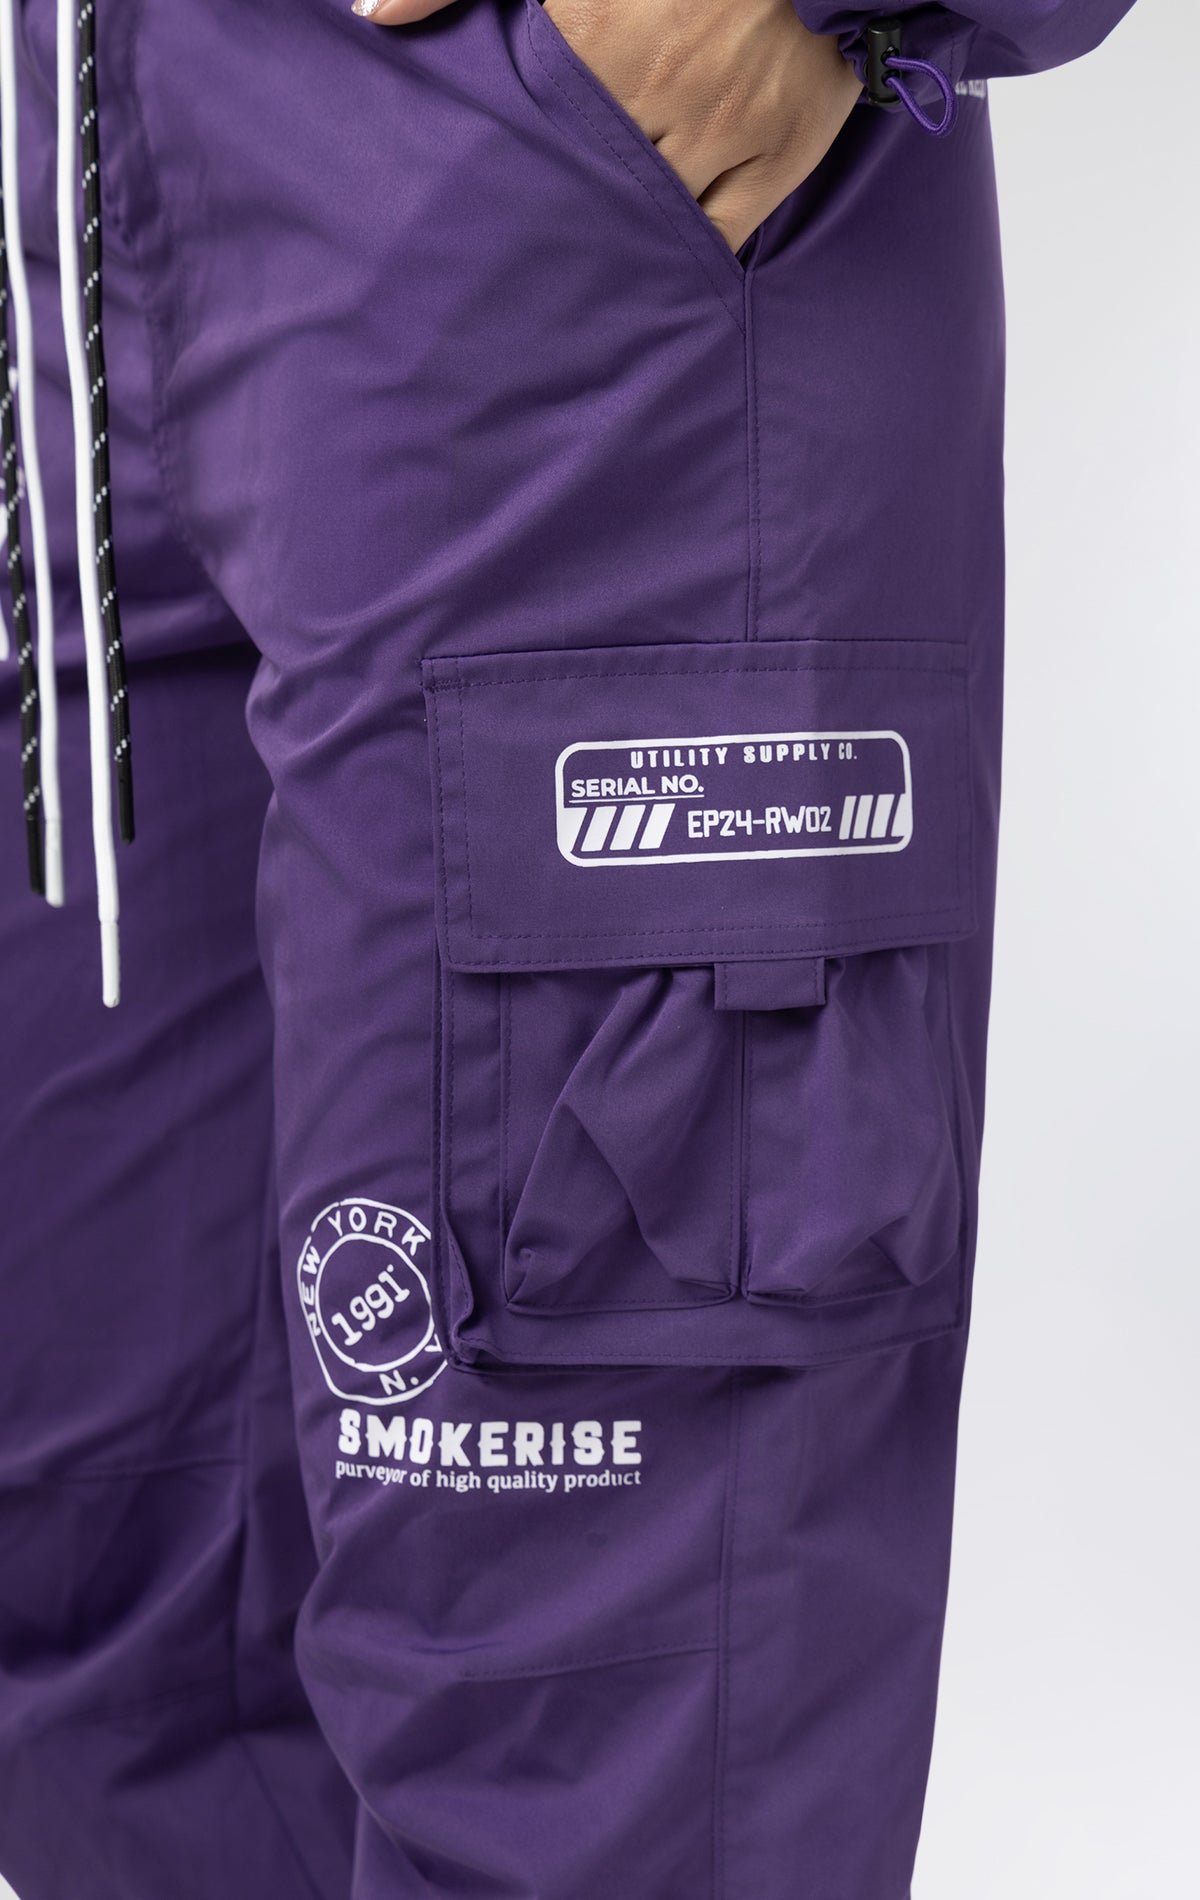 White stacked cargo pants in purple